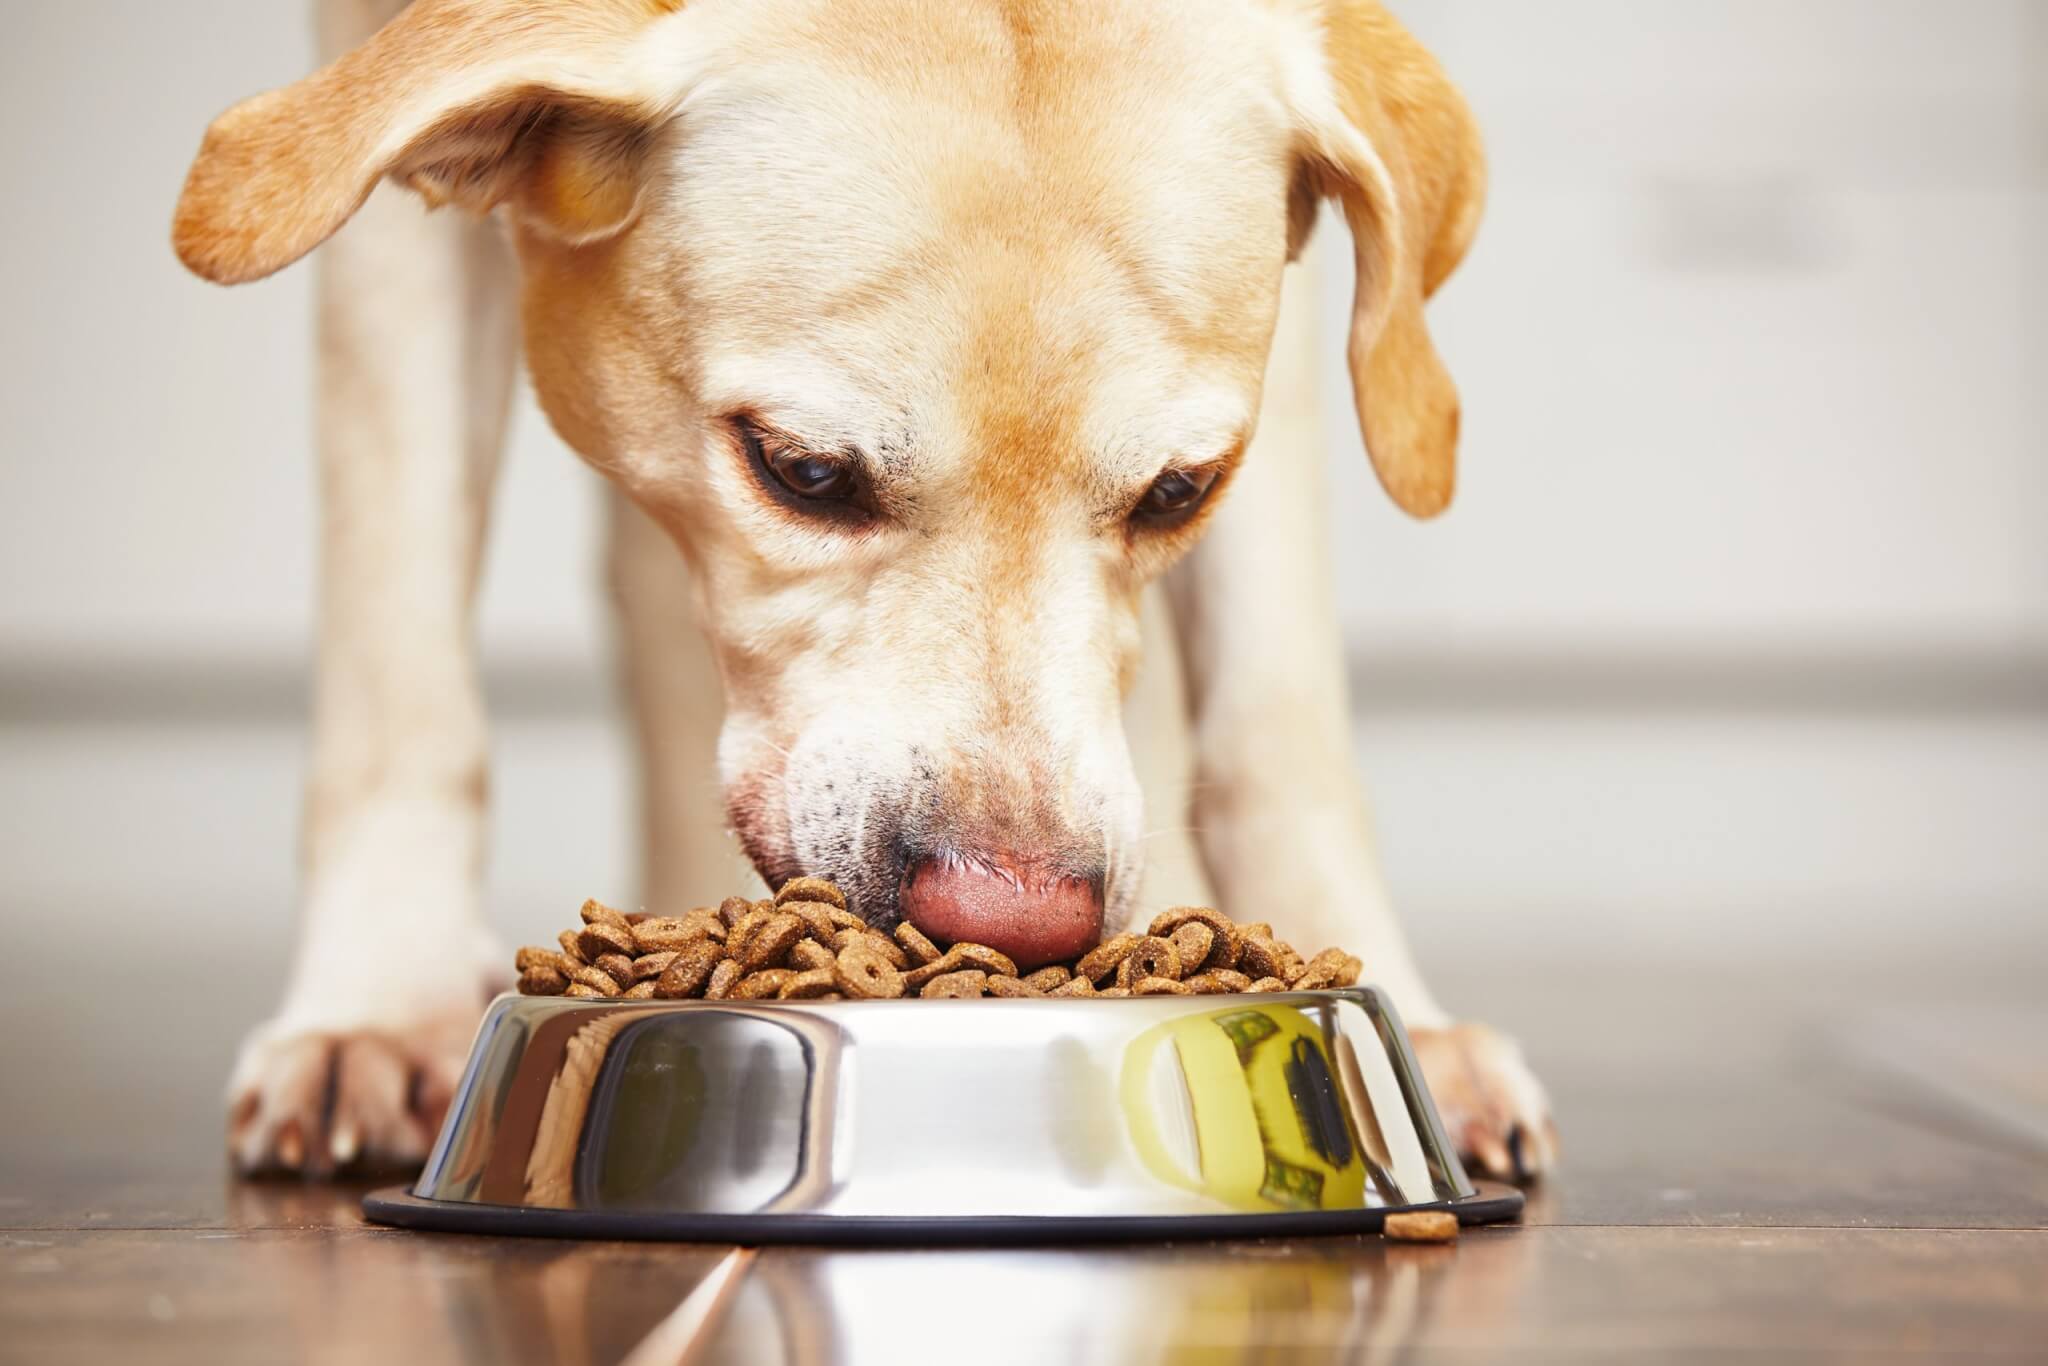 Best Dog Foods Of 2022: Top 4 Brands Most Recommended By Expert Websites